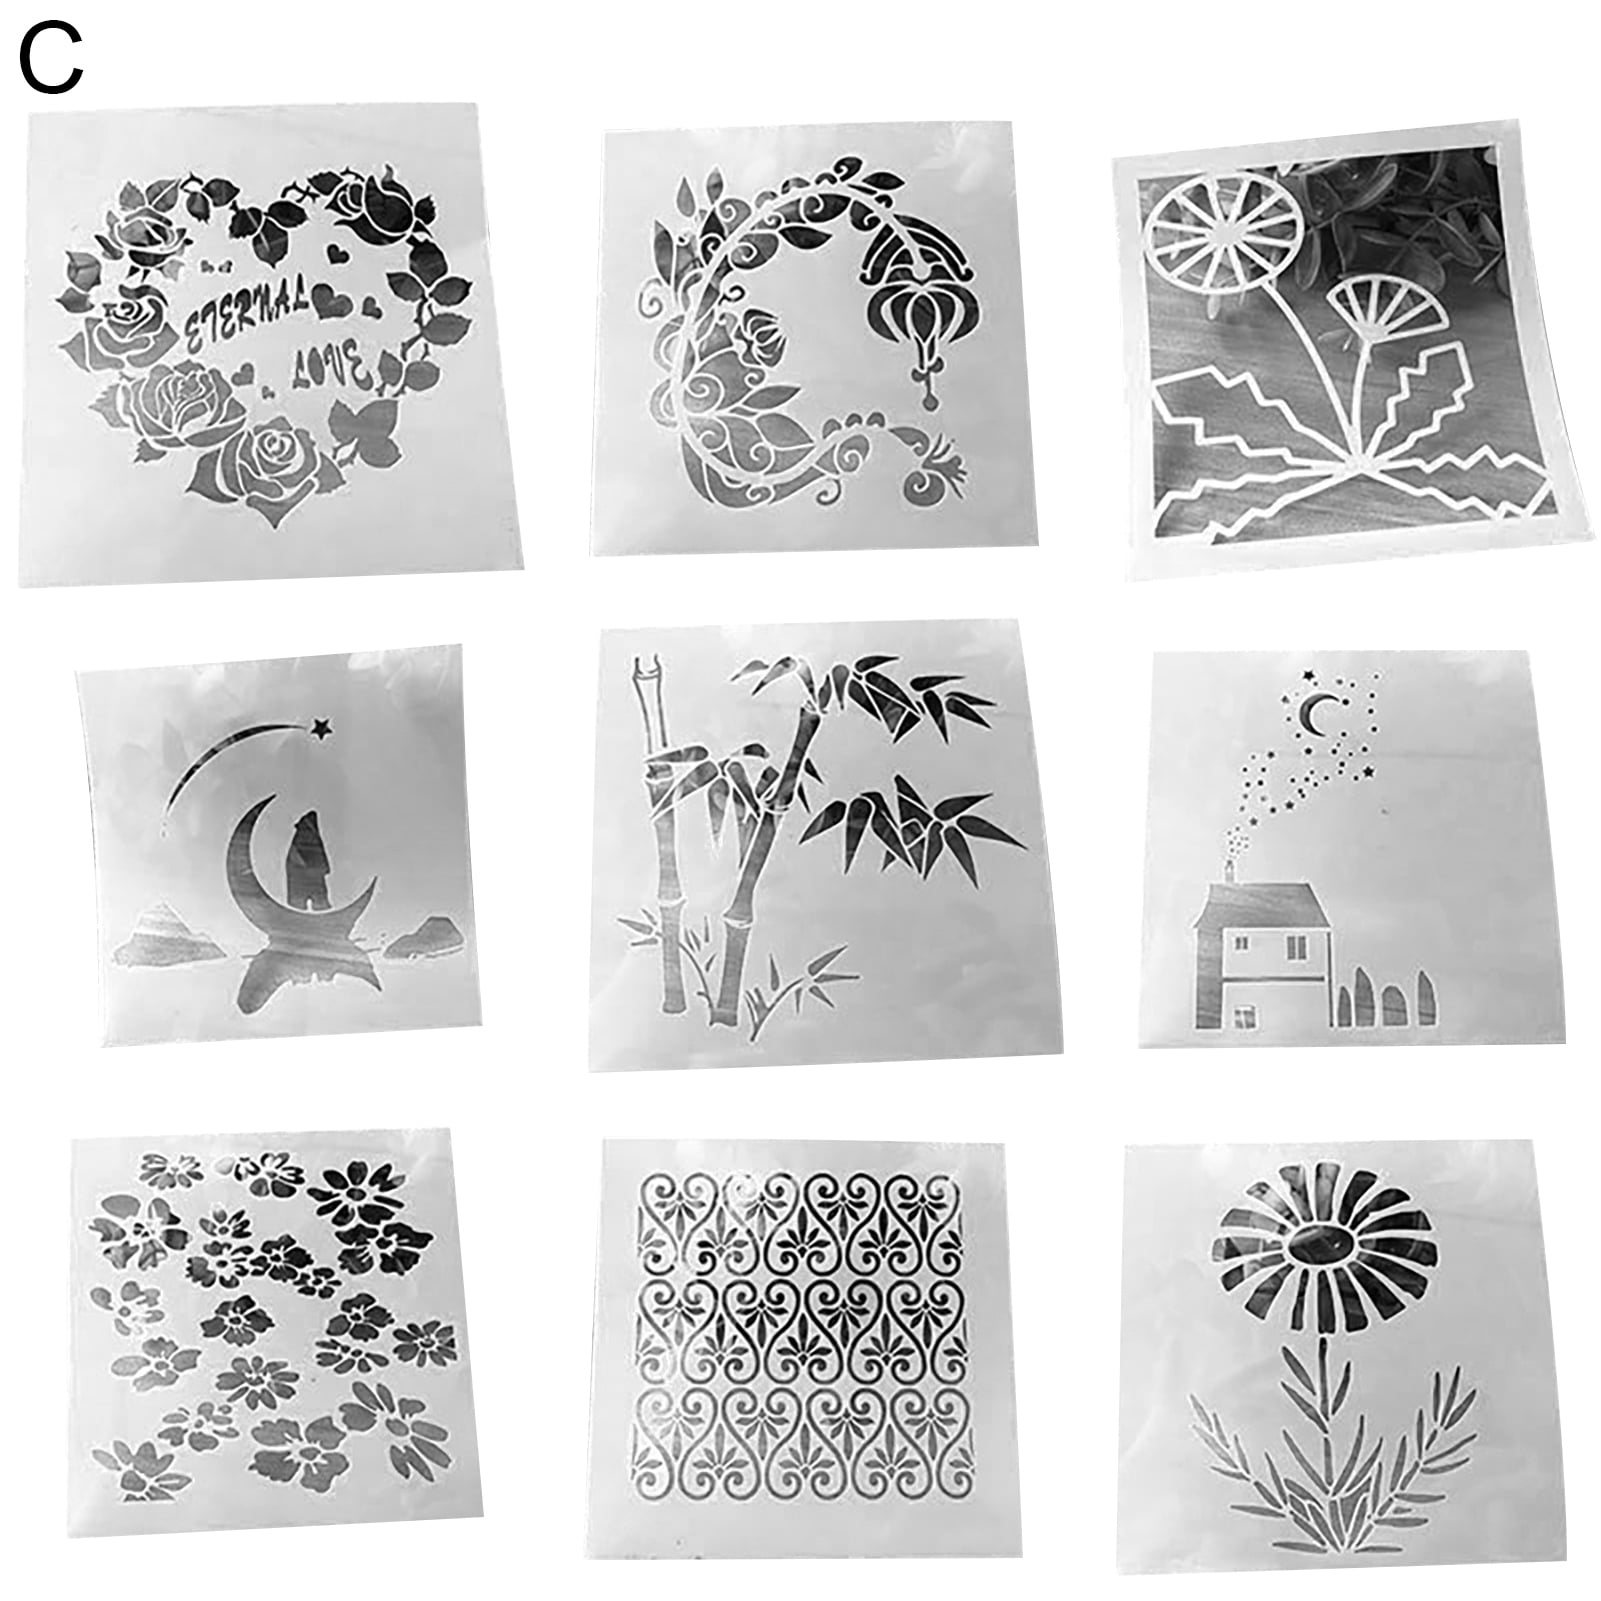 Large 10x12 Lily Stencil for Painting on Wood - Flower Stencils for  Crafts Reusable on Canvas, Paper, Walls, Furniture and More - DIY Art &  Paint